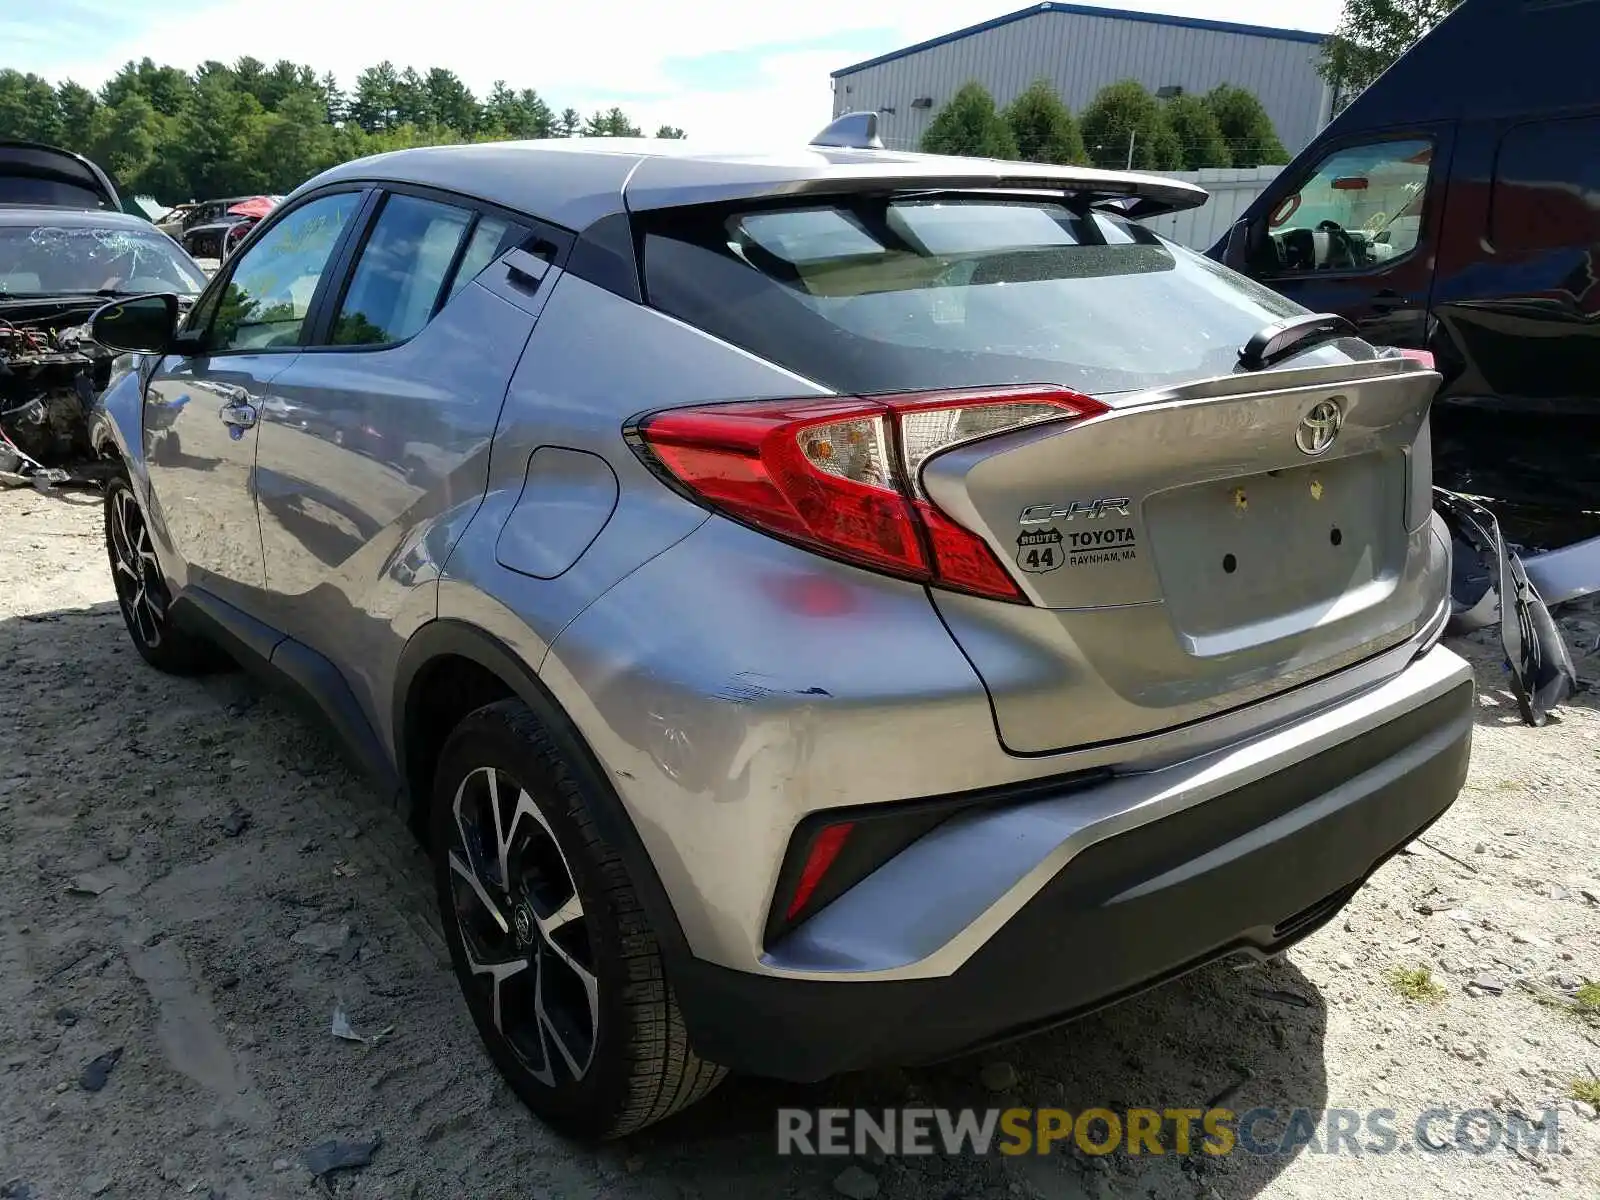 3 Photograph of a damaged car NMTKHMBXXKR069781 TOYOTA C-HR 2019